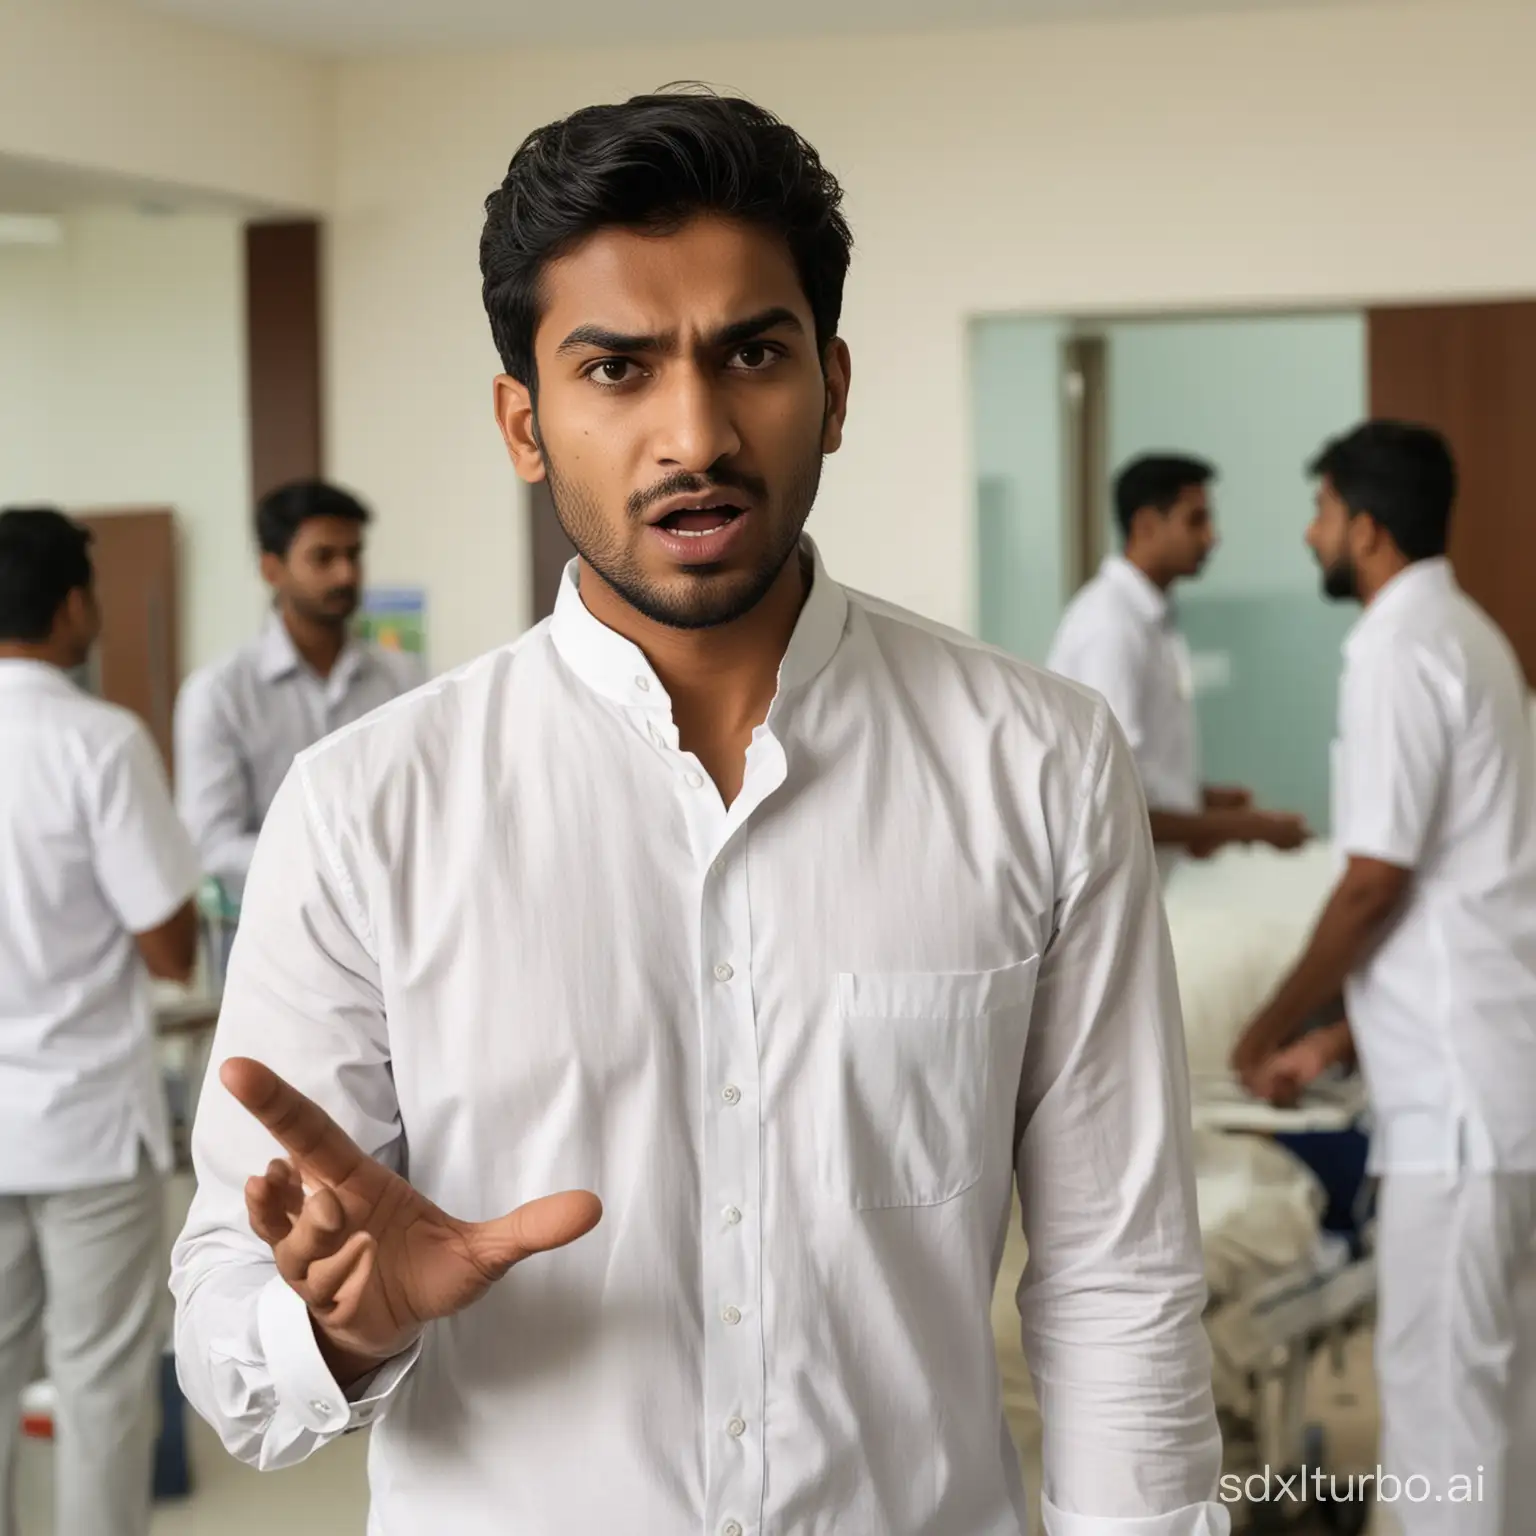 Angry-Indian-Man-in-White-Shirt-Arguing-at-Hospital-Reception